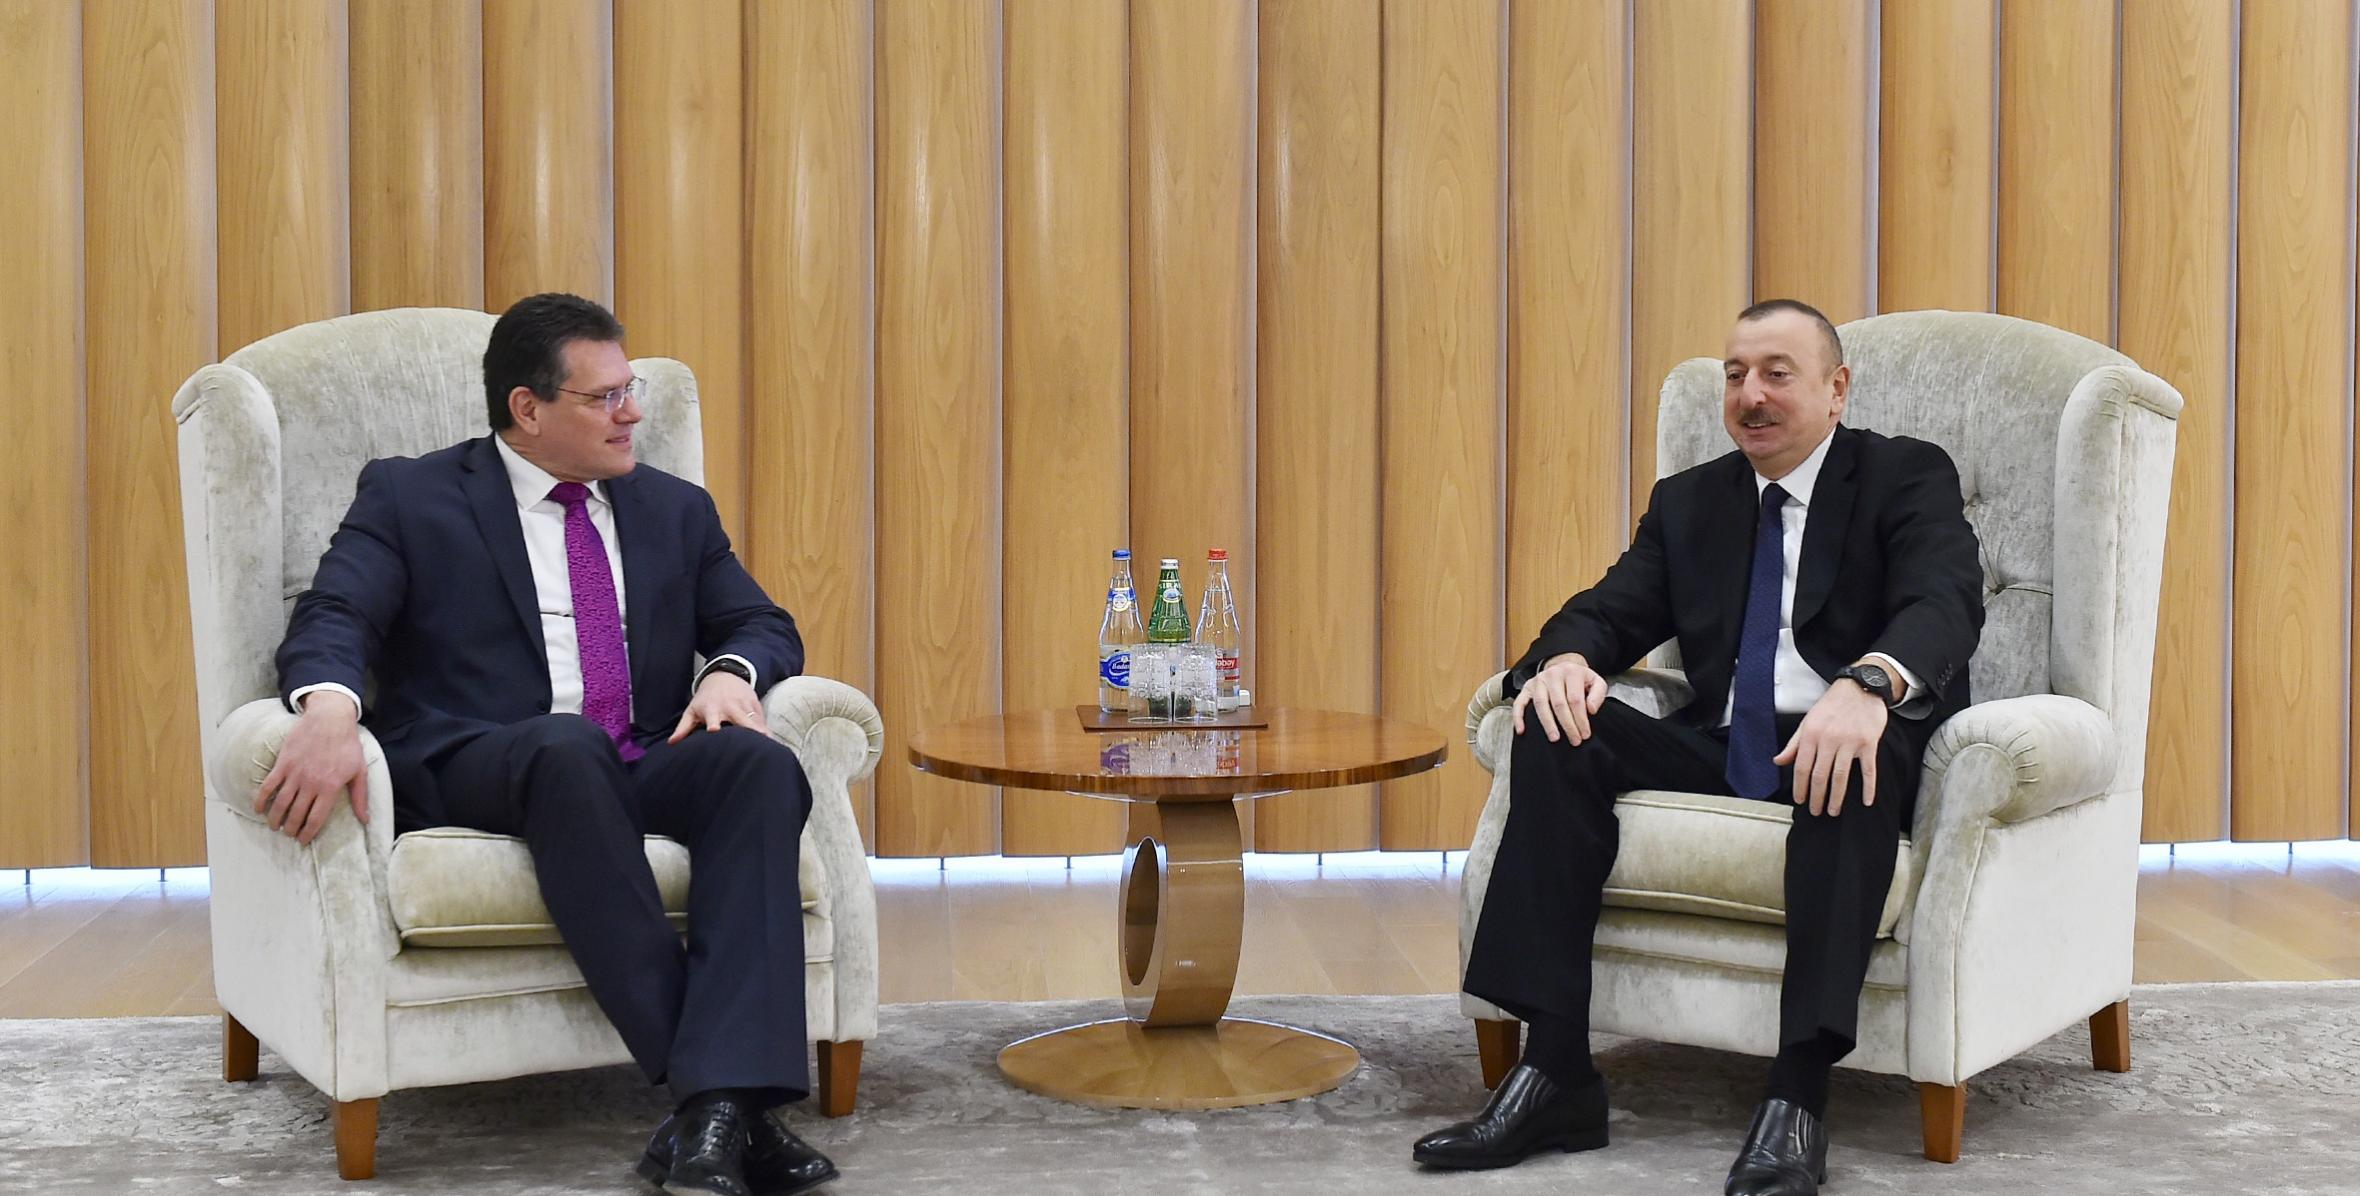 Ilham Aliyev met with European Commission Vice-President for Energy Union Maros Sefcovic